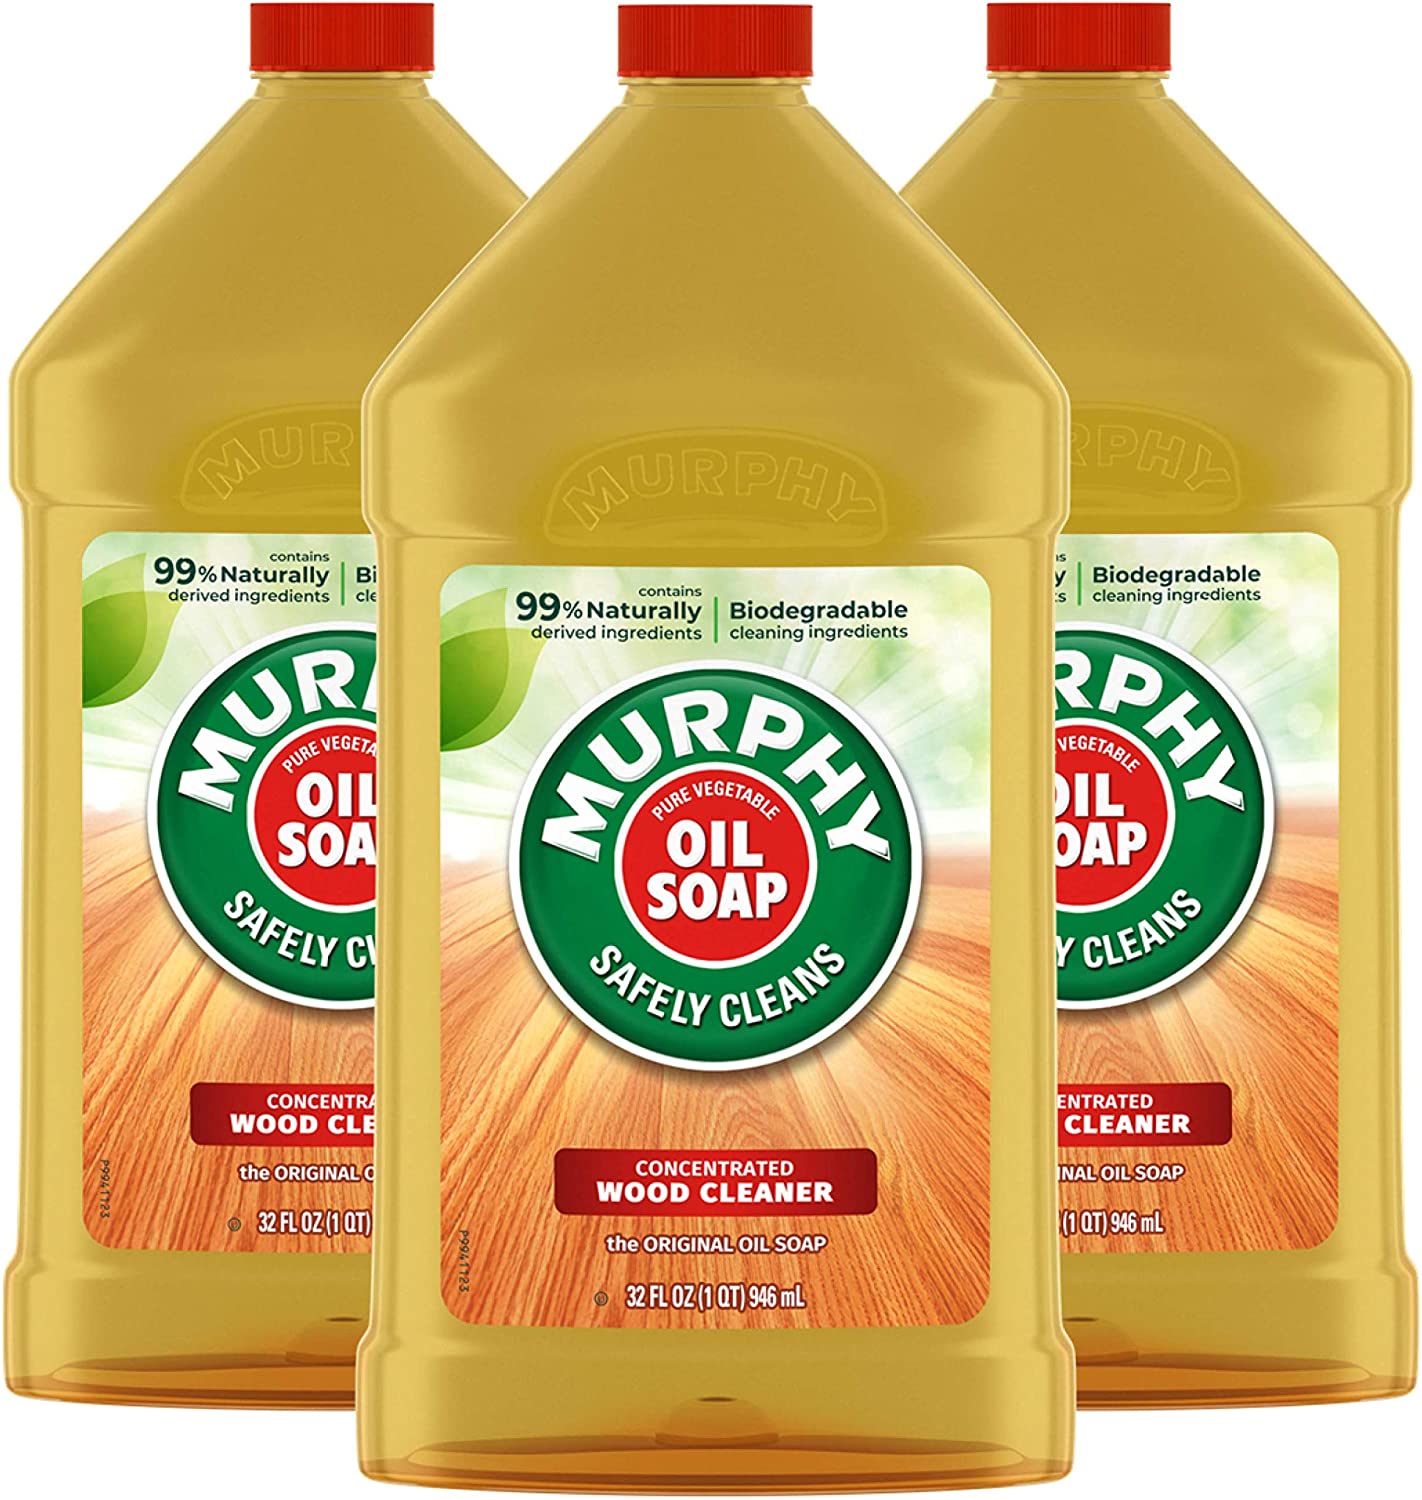 Murphy Oil Soap Concentrated Wood Cleaner $6.36 shipped